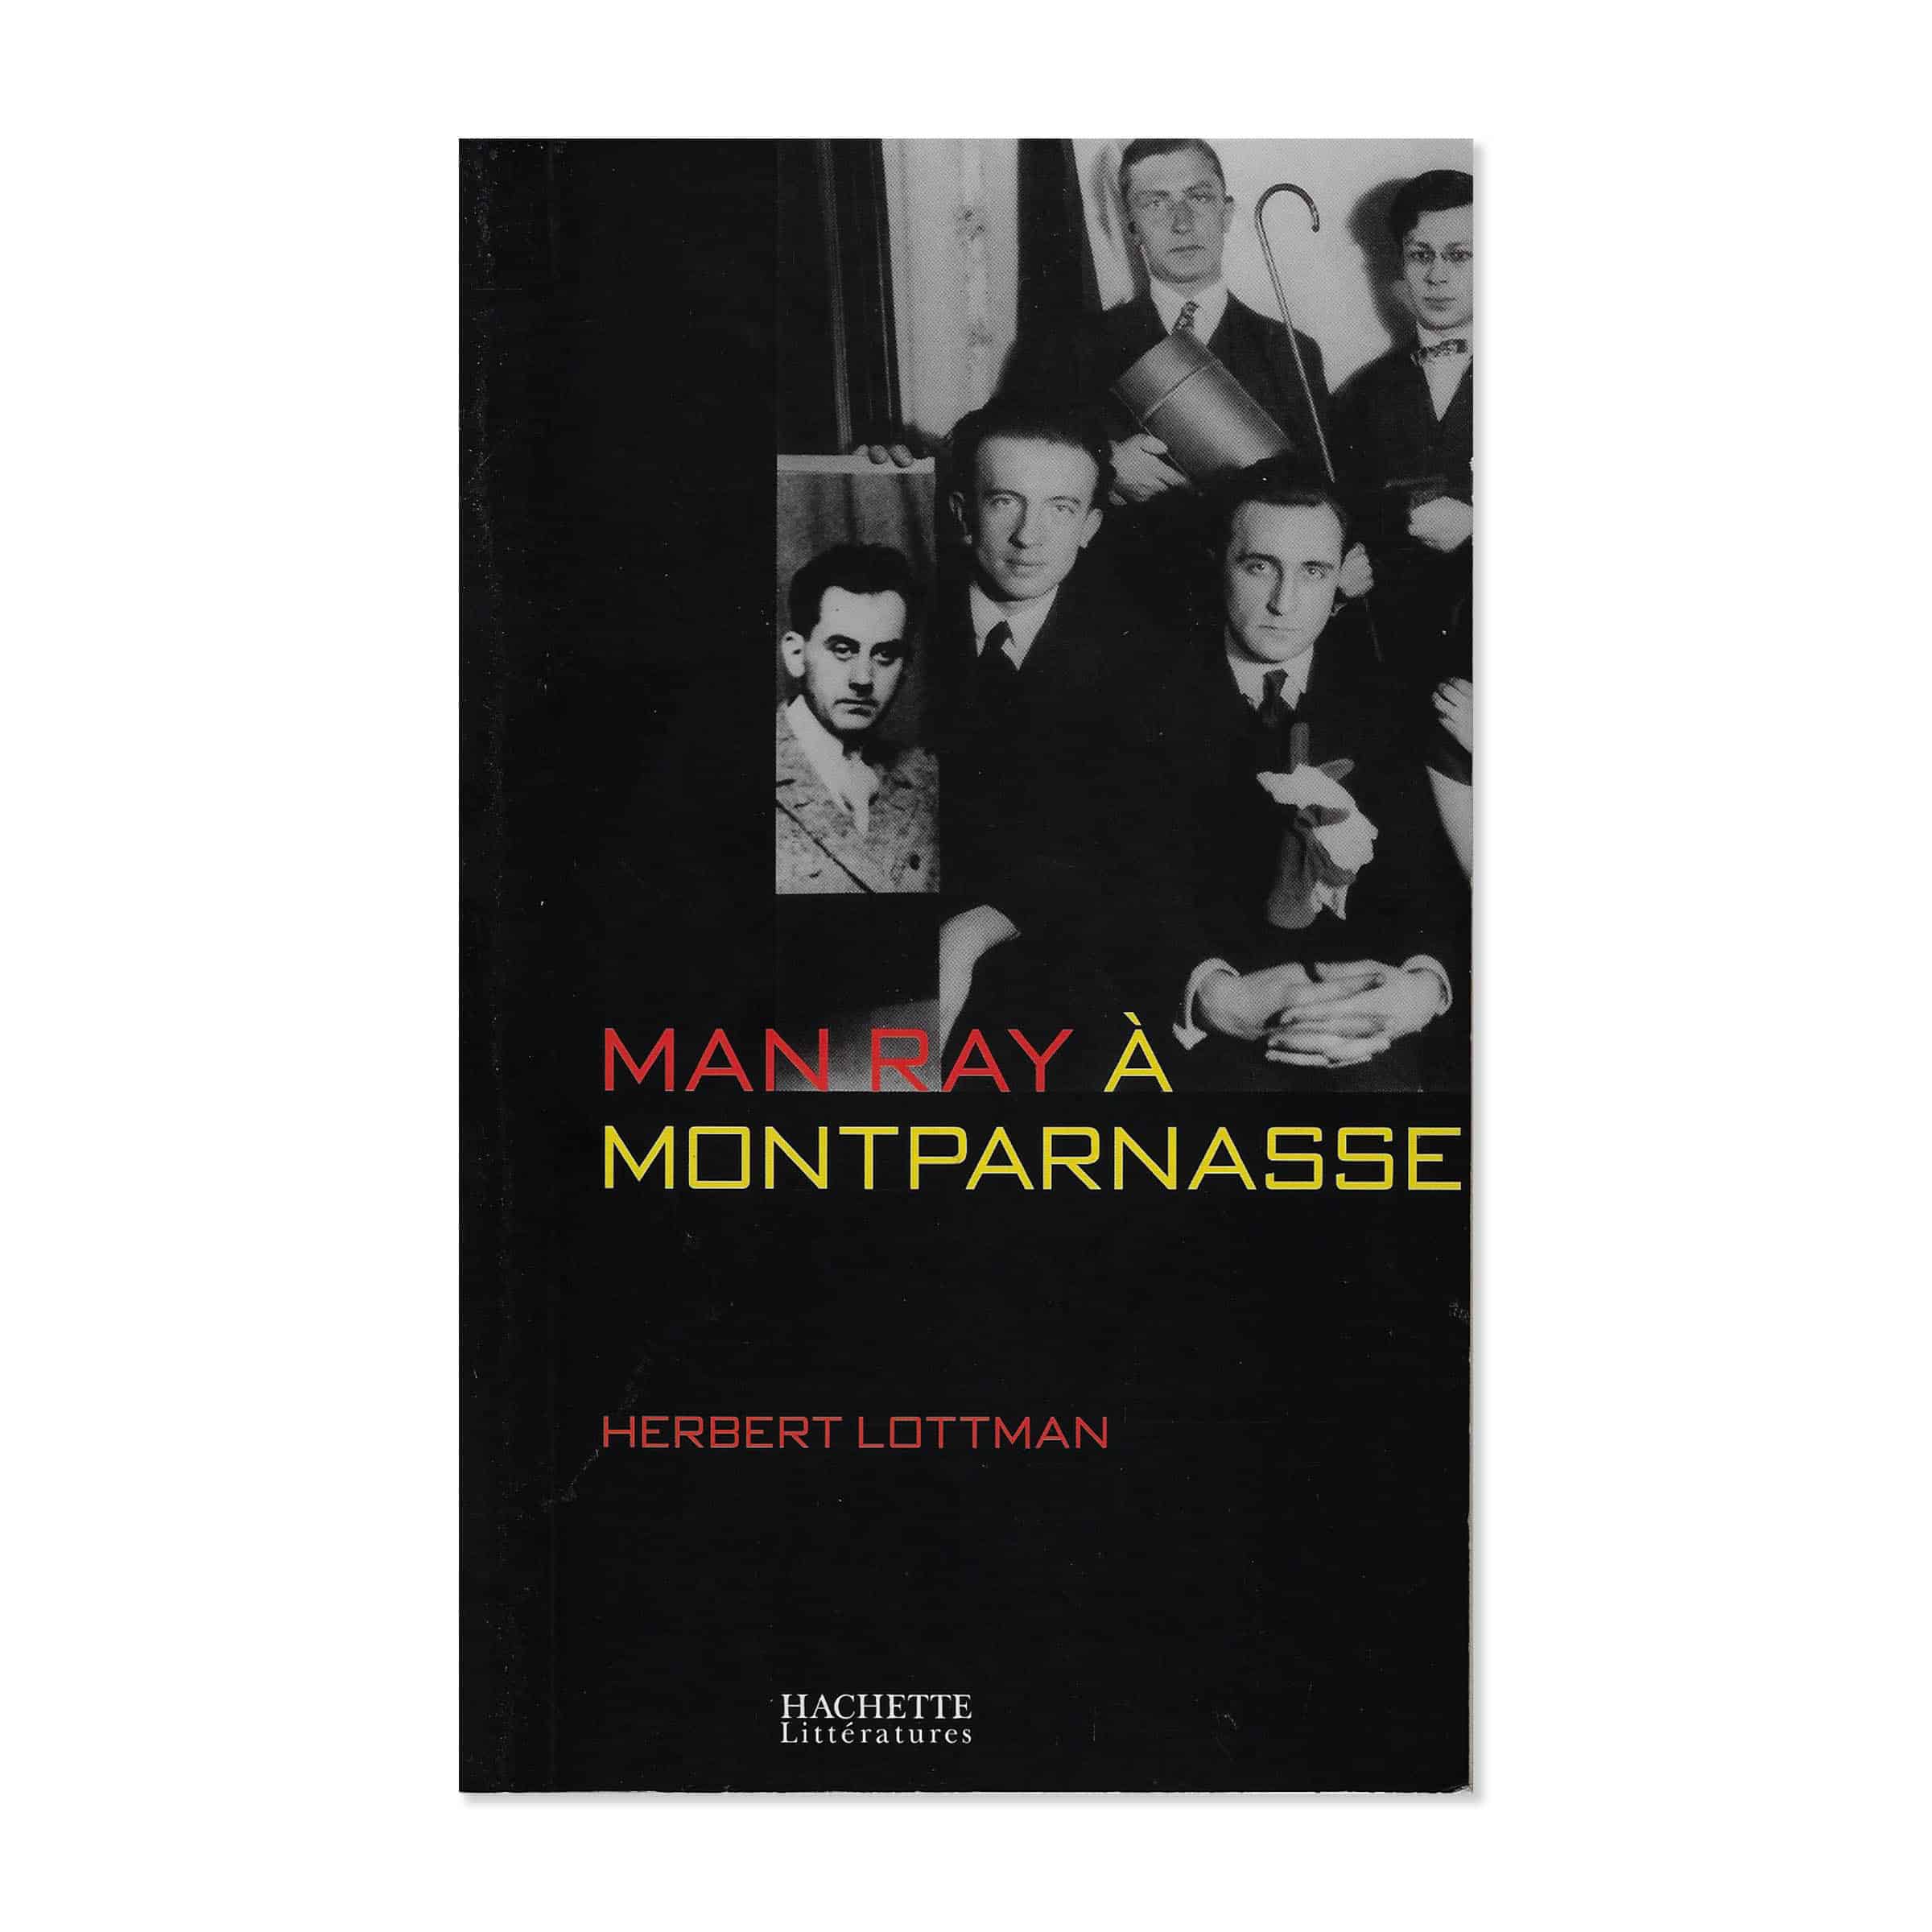 Man Ray à Montparnasse. Cover view